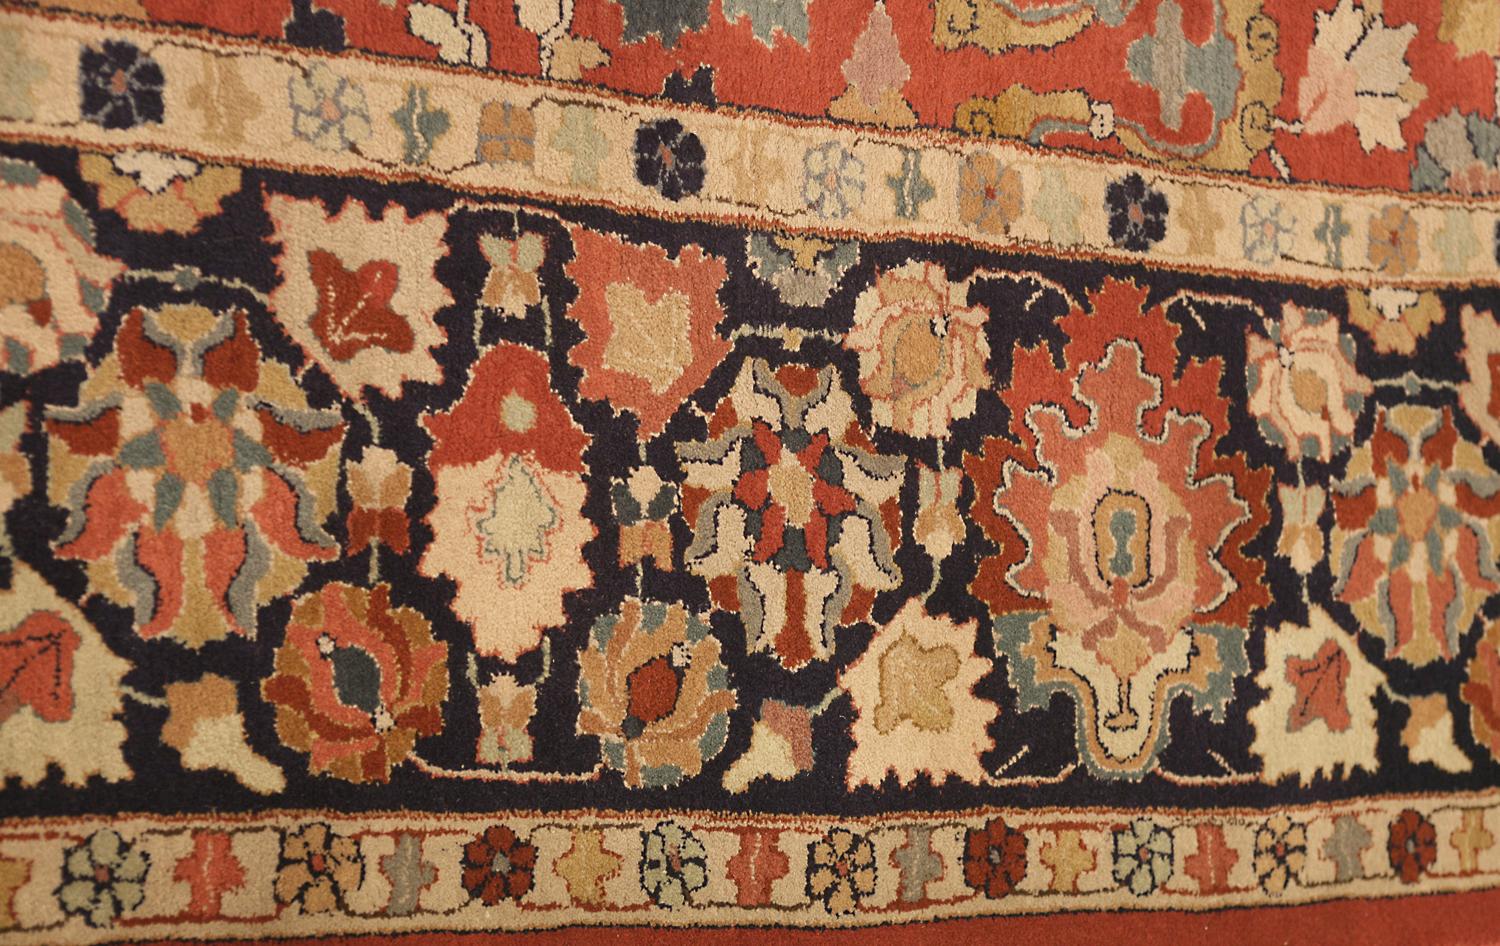 20th Century Floral All-Over Field Massive Antique German Rust Tetex Carpet, ca. 1920 For Sale